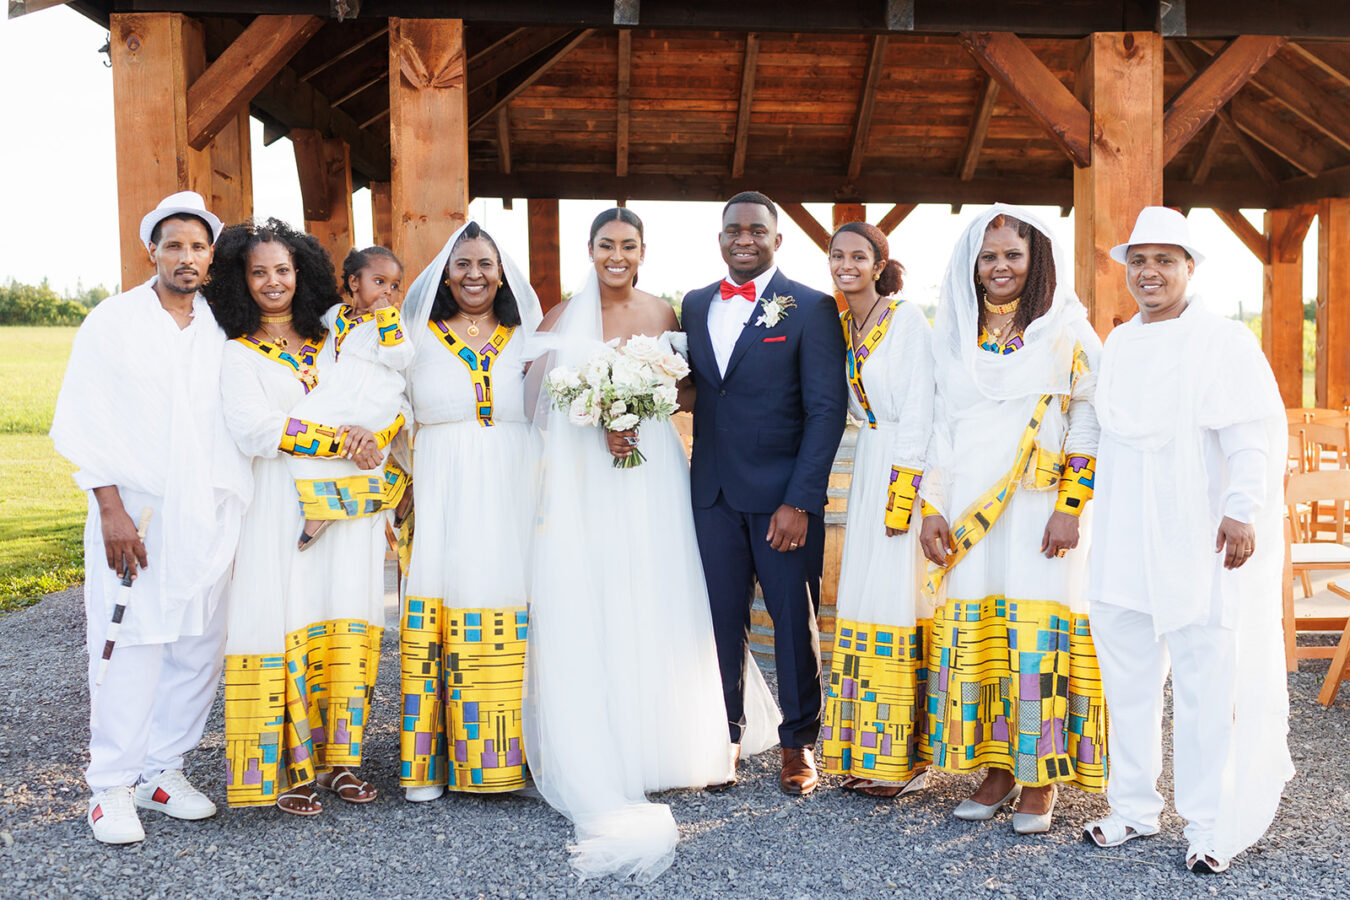 Choose a Black photographer for your wedding or an Ottawa photographer who knows how to beautifully capture your melanin.